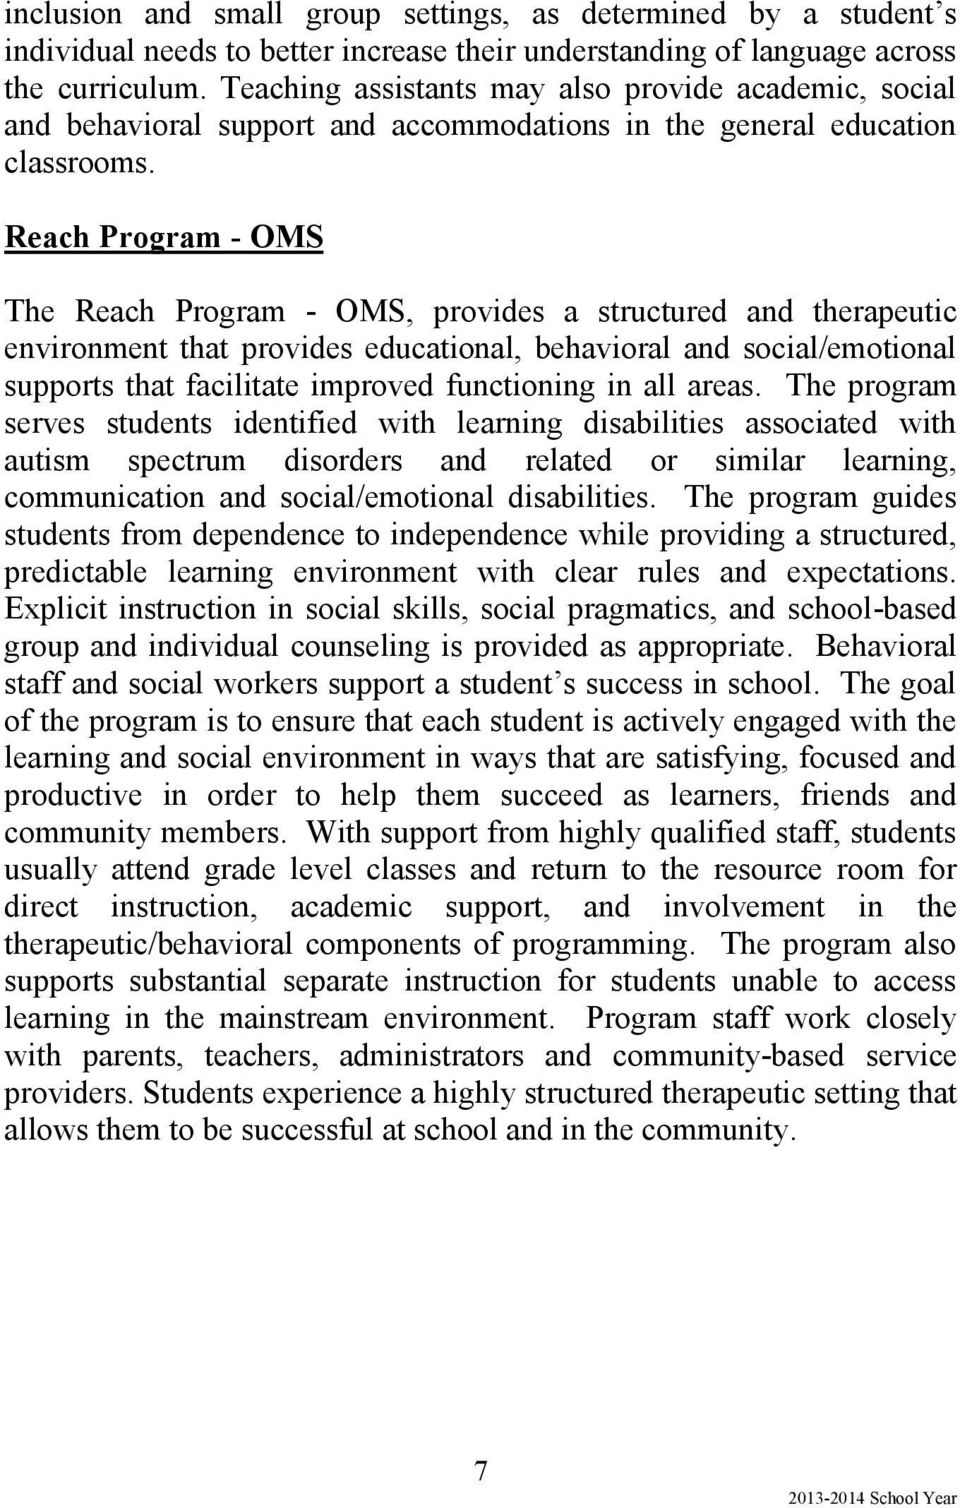 Reach Program - OMS The Reach Program - OMS, provides a structured and therapeutic environment that provides educational, behavioral and social/emotional supports that facilitate improved functioning